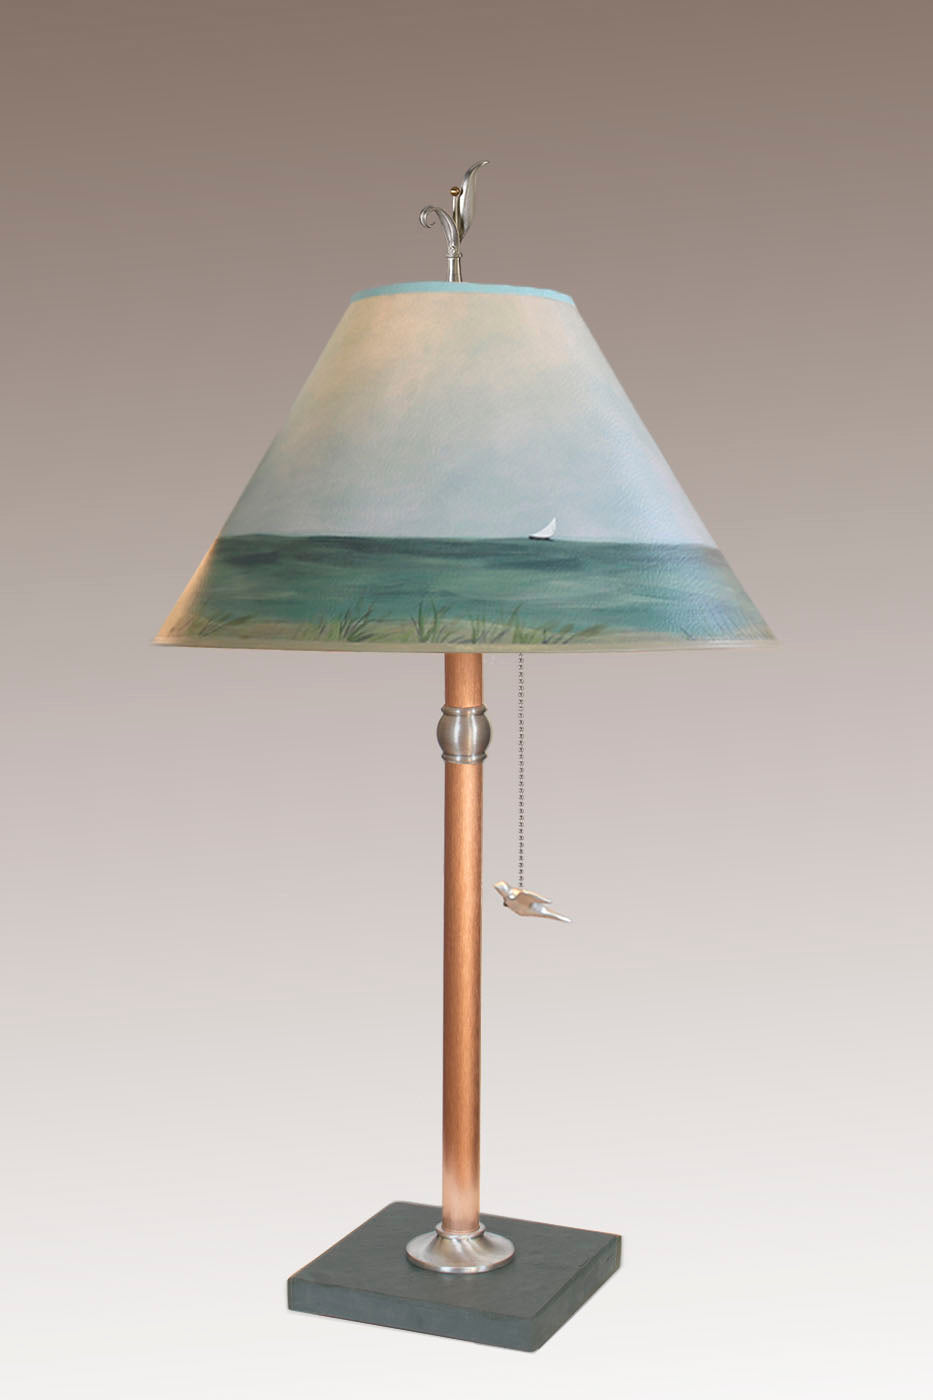 Copper Table Lamp with Medium Conical Shade in Shore